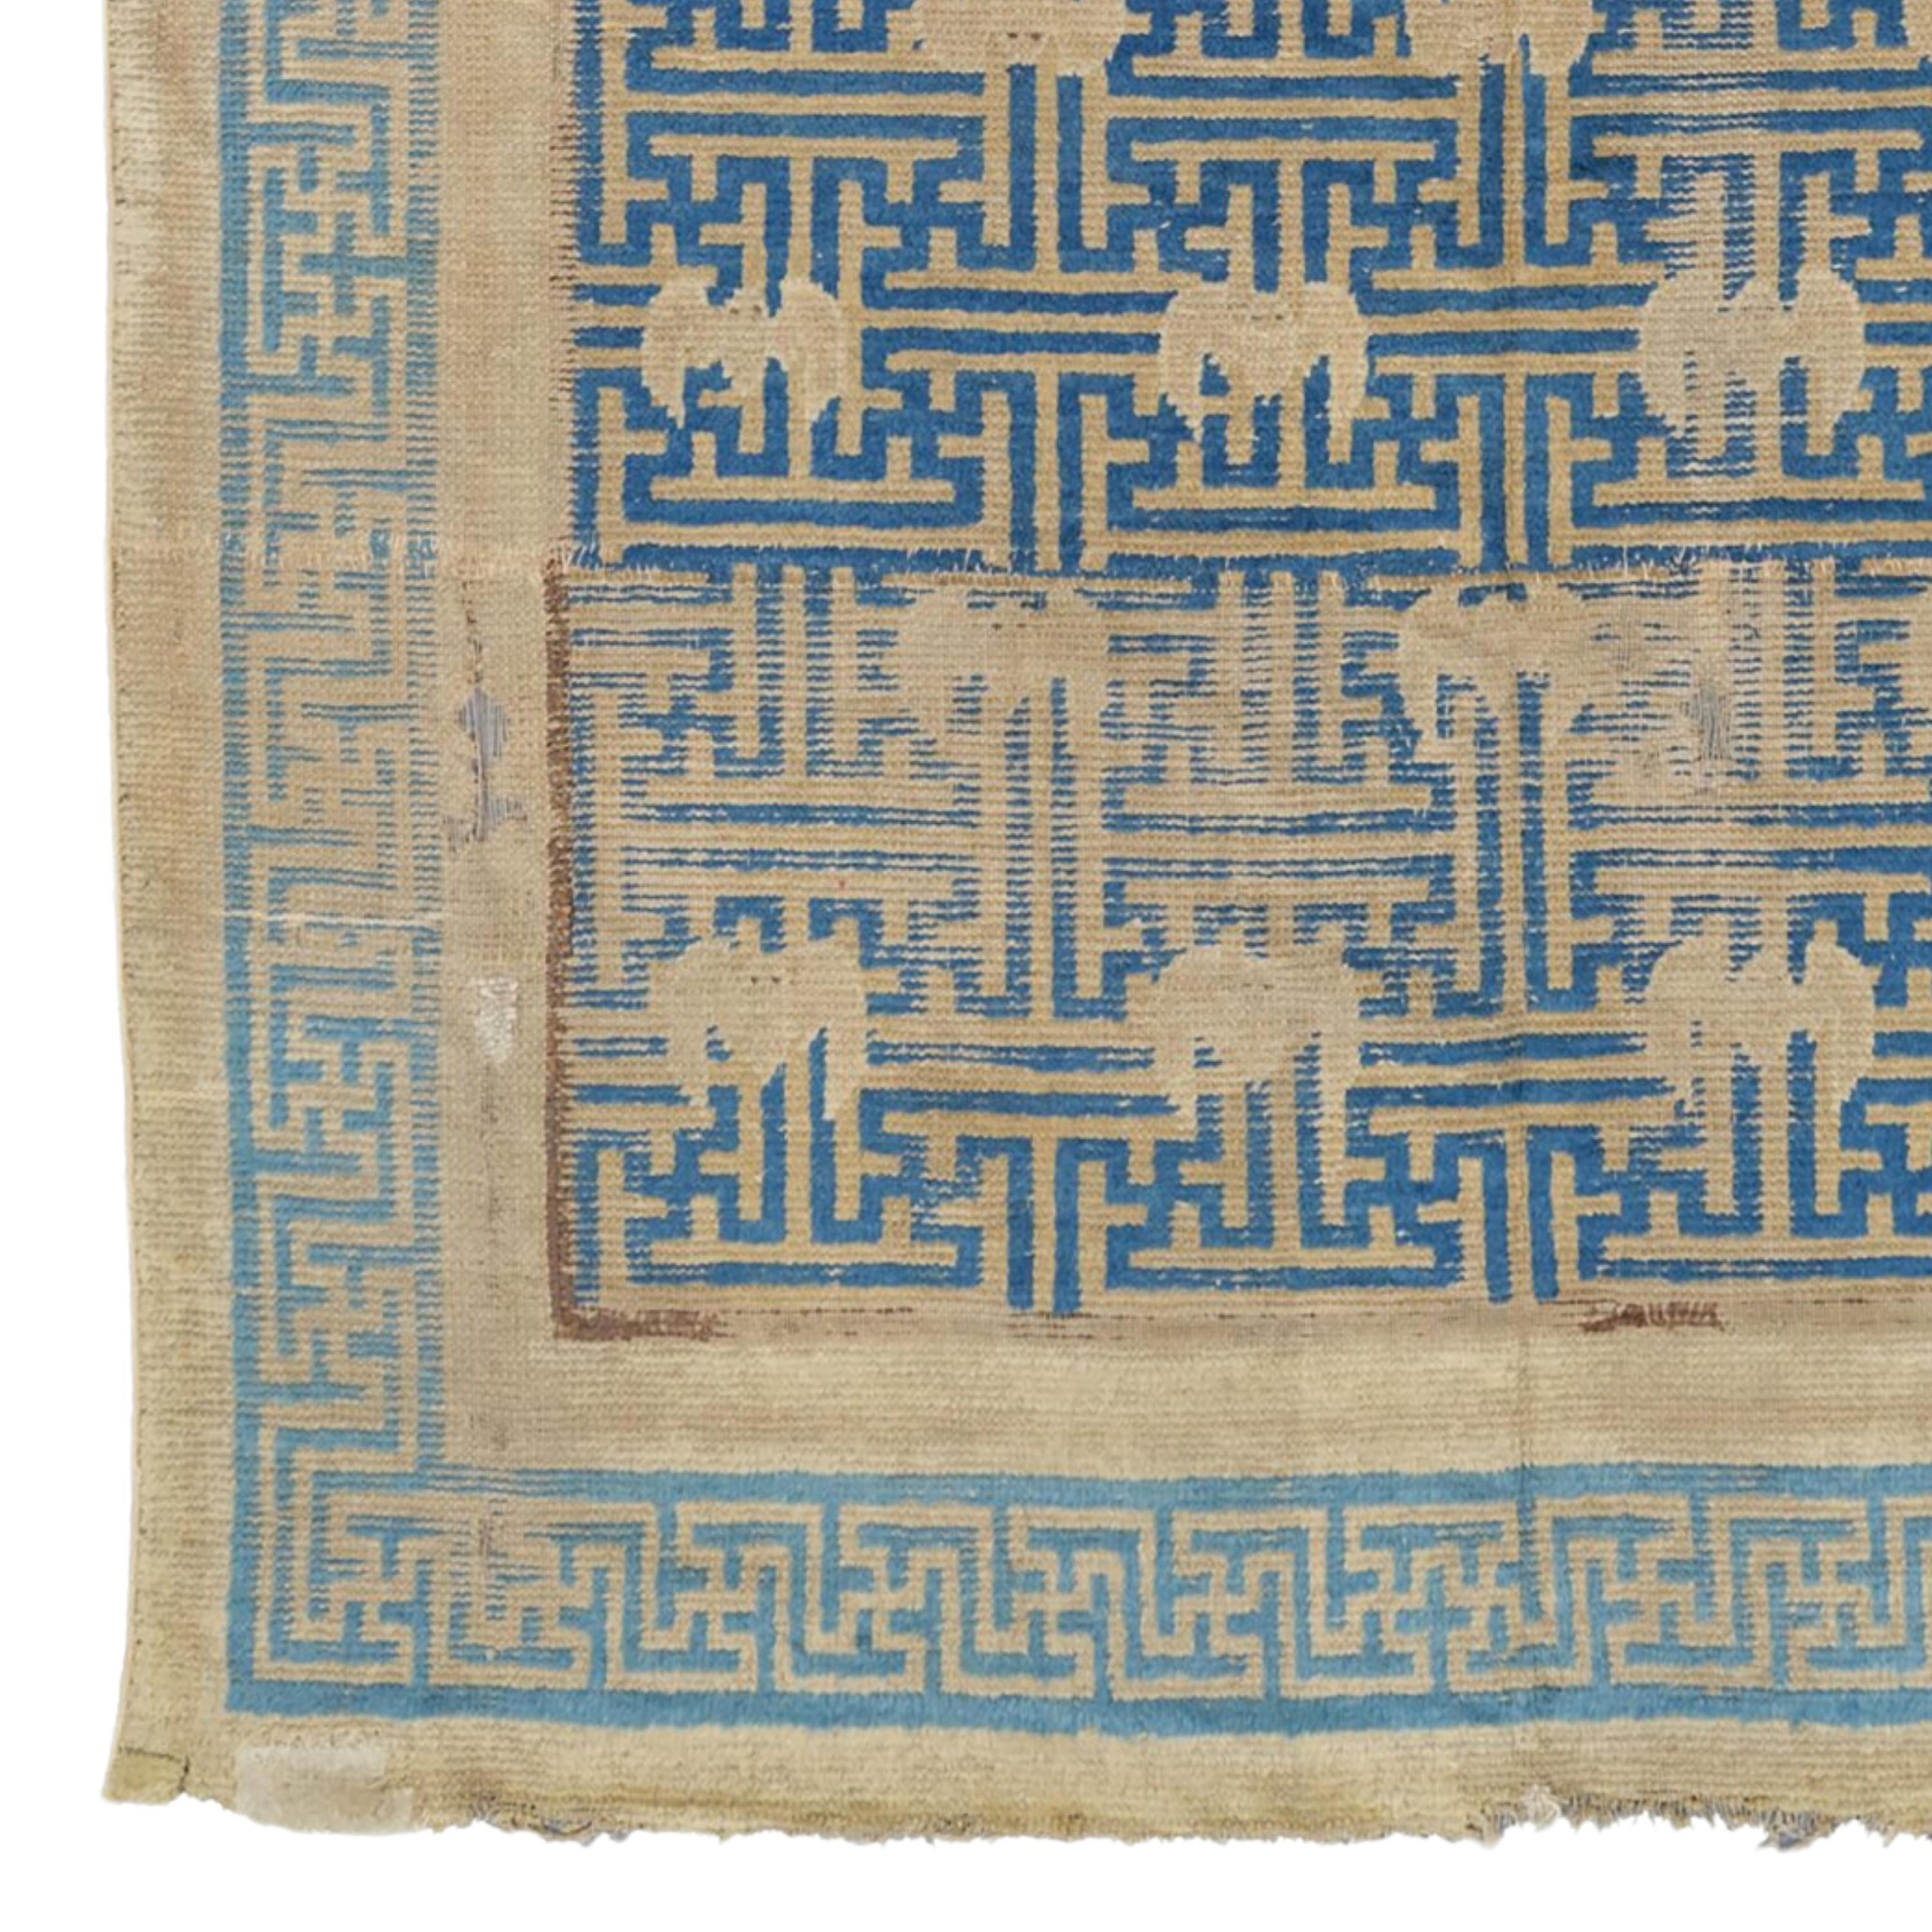 A Unique Piece of the 17th Century: Antique Chinese Ningxia Carpet

This exquisite 17th-century Ningxia tapestry is a rare example of antique Chinese art. This work, in rich shades of blue and beige, displays the finest craftsmanship and